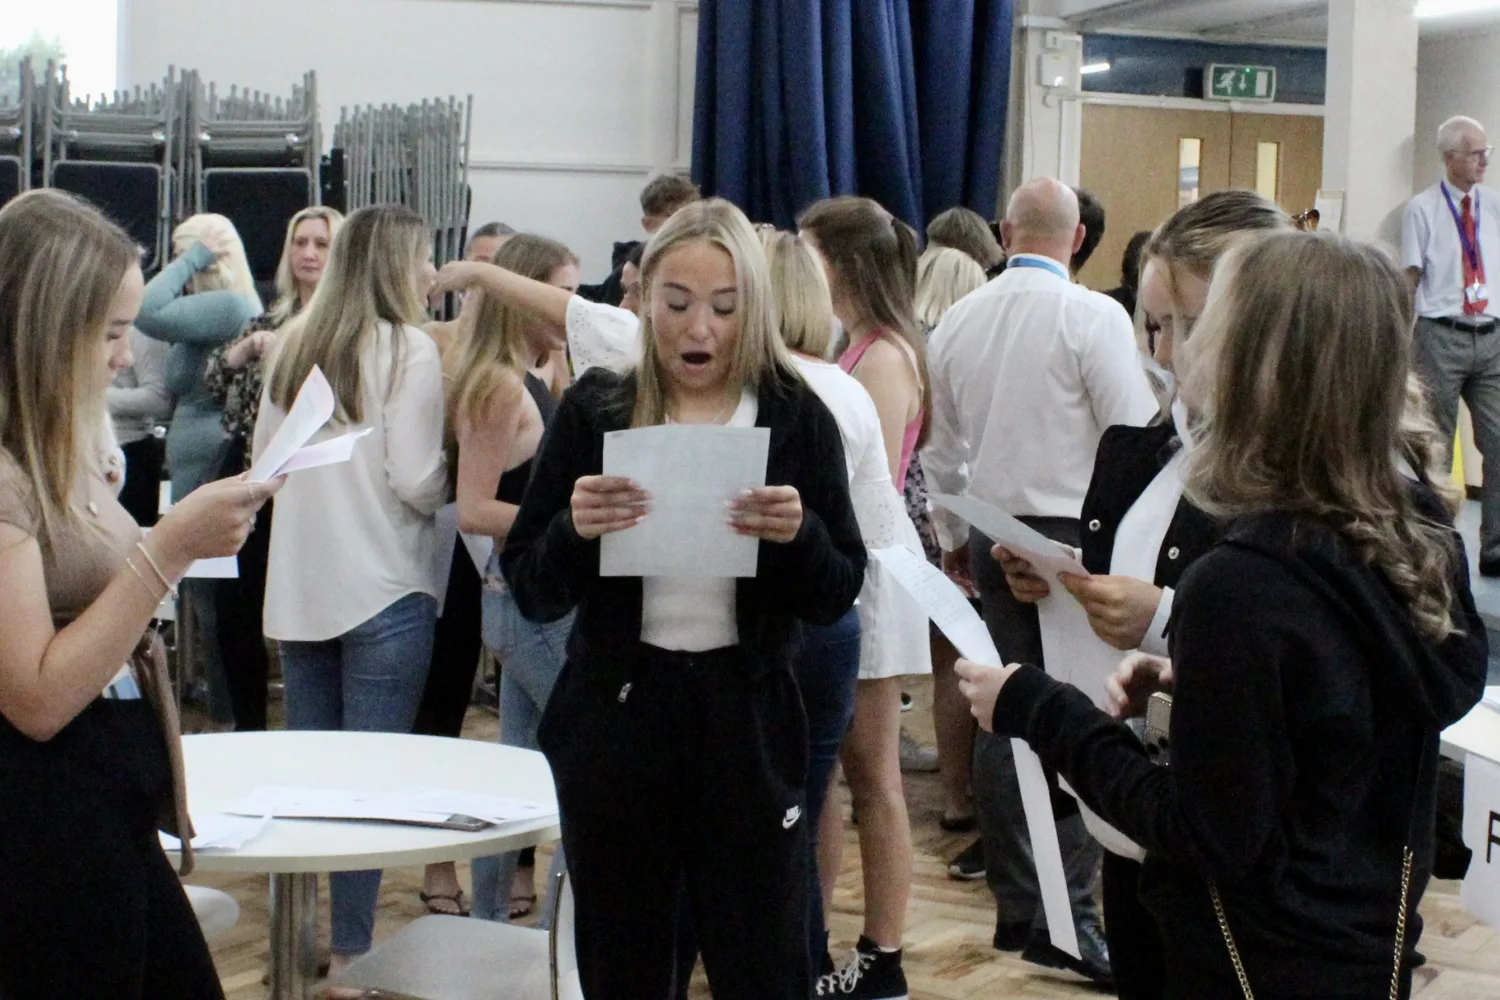 Students opening their results